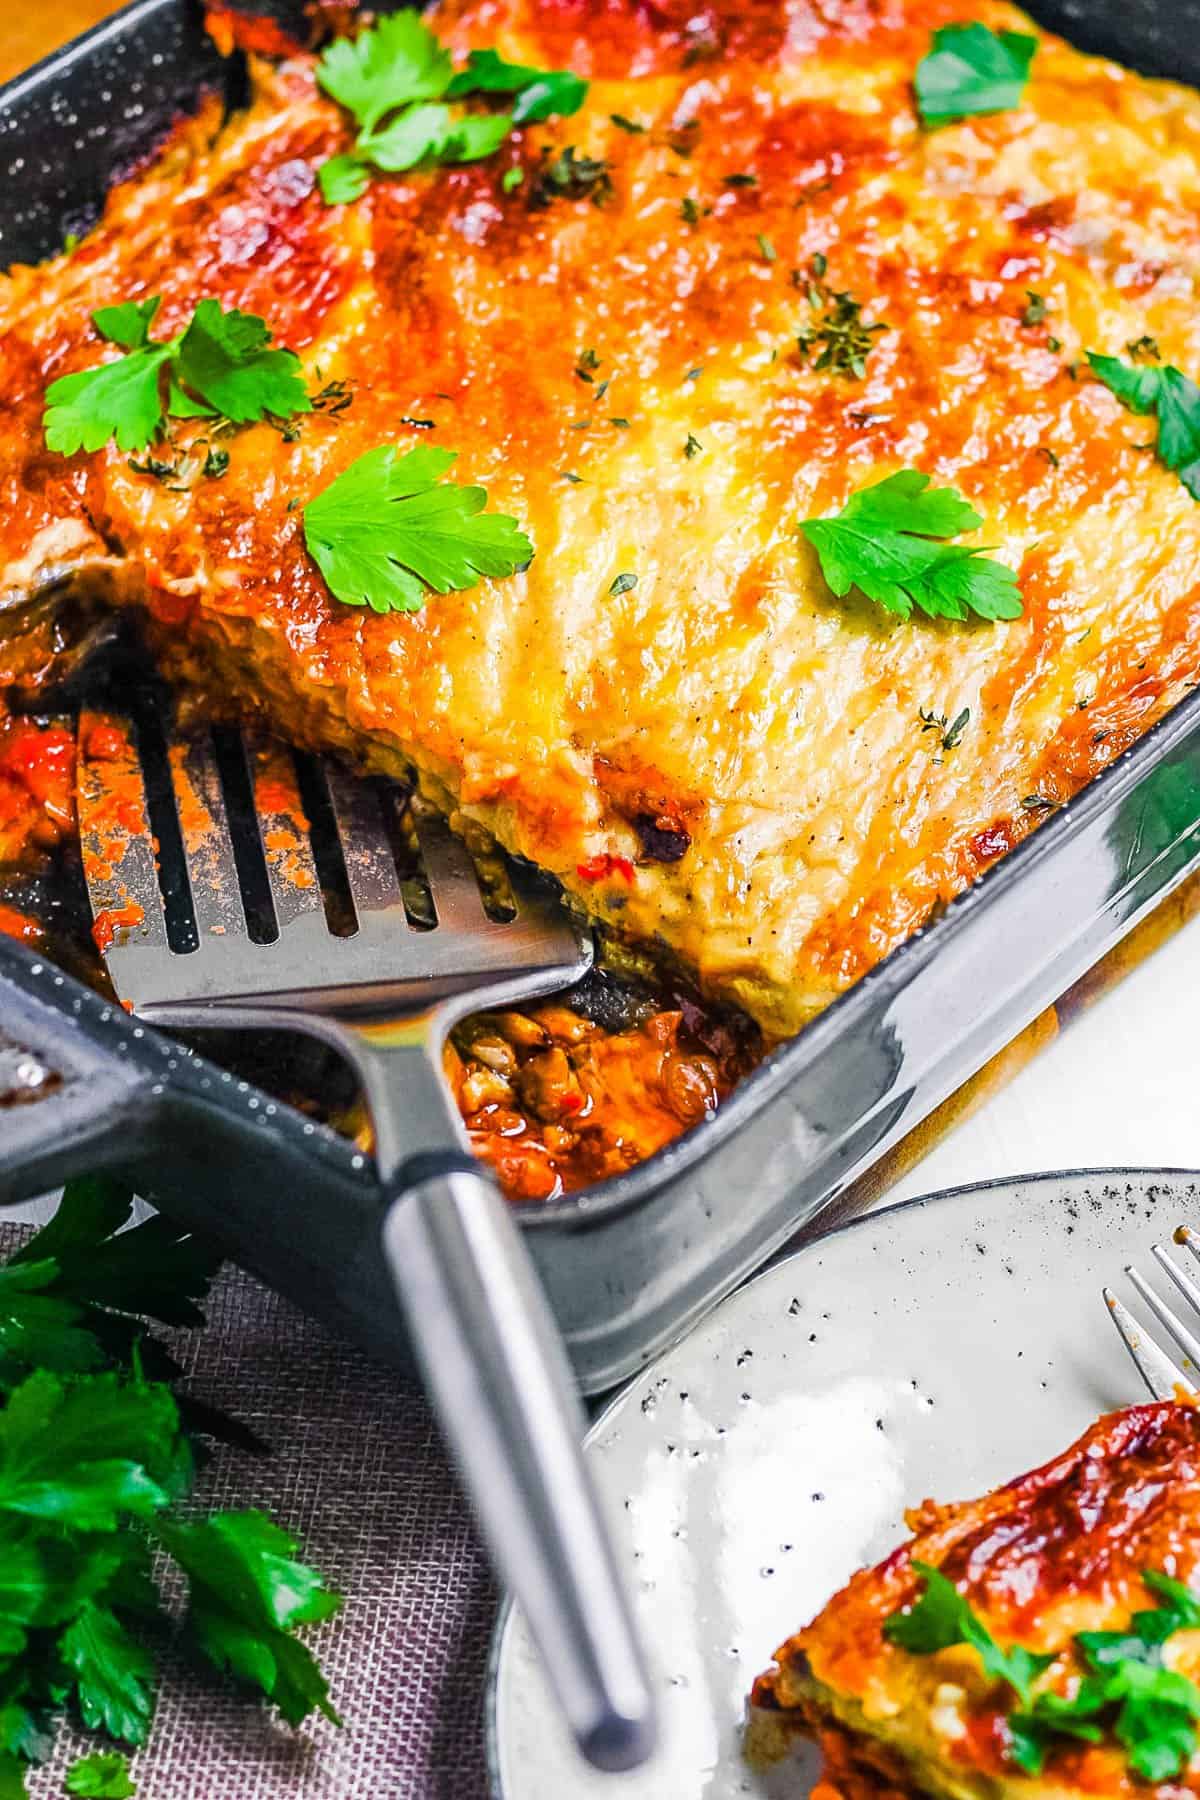 Easy vegan moussaka in a baking dish, with a slice cut out and placed on a plate.